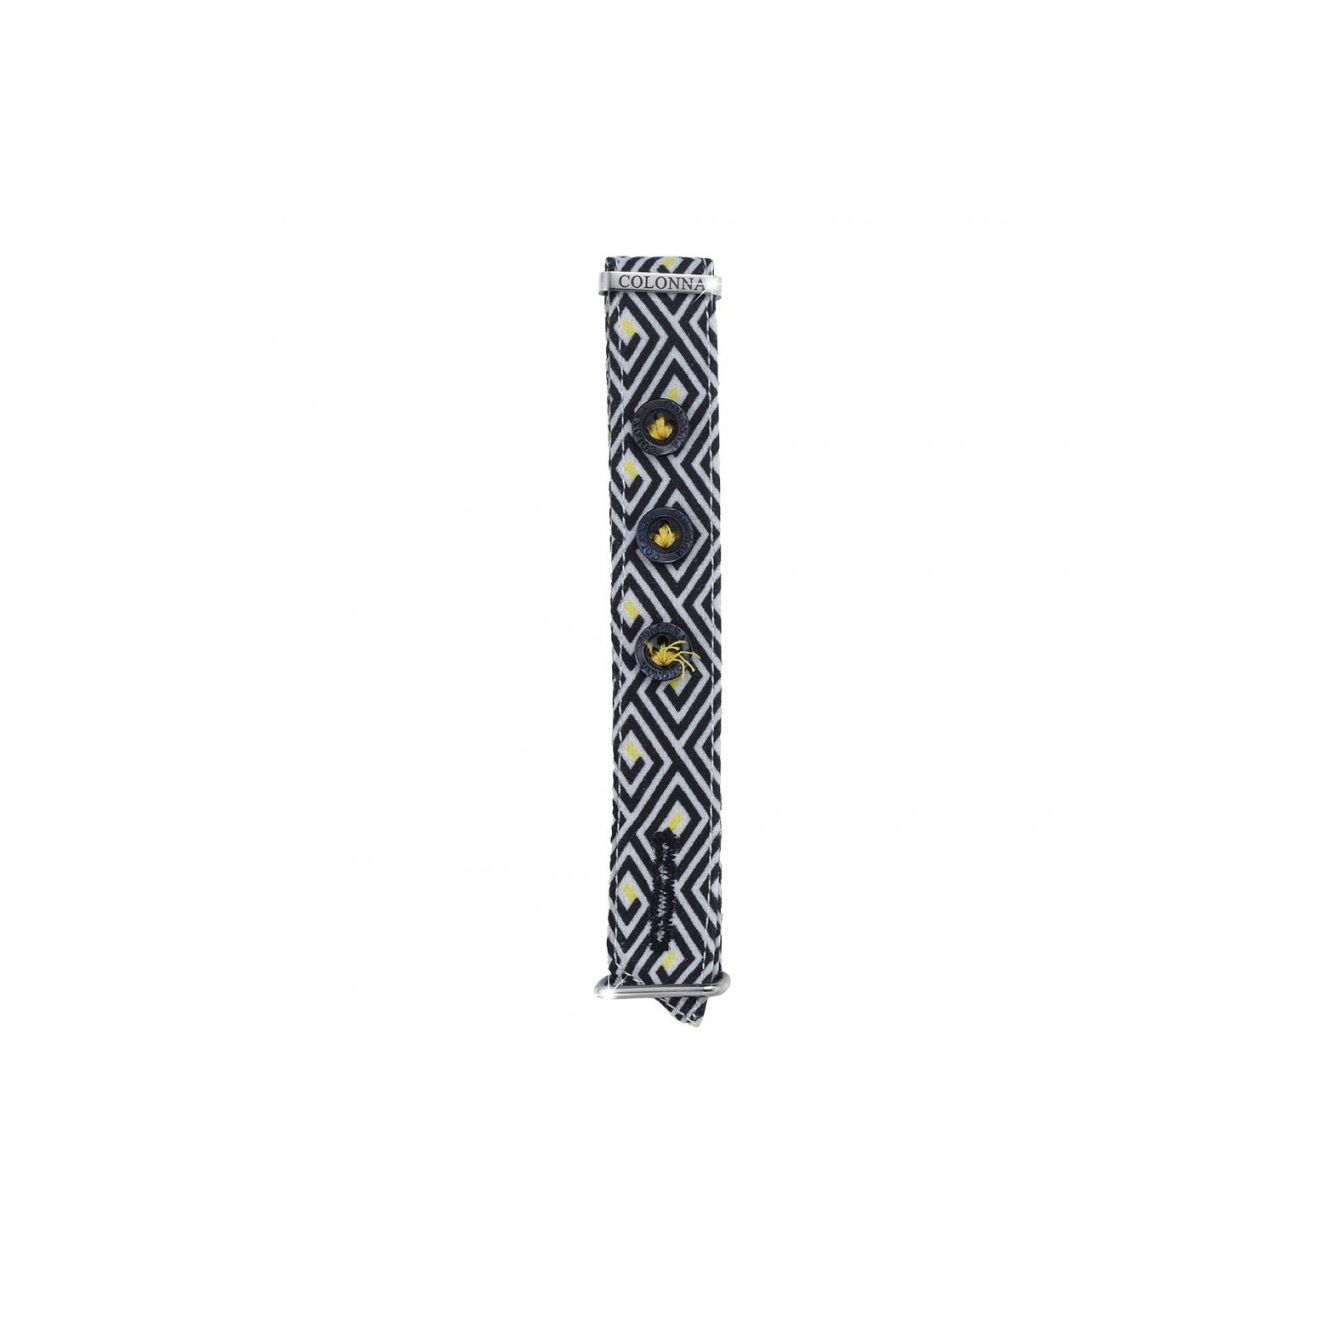 WOMEN’S STRAP WITH GEOMETRIC YELLOW AND BLACK DESIGN